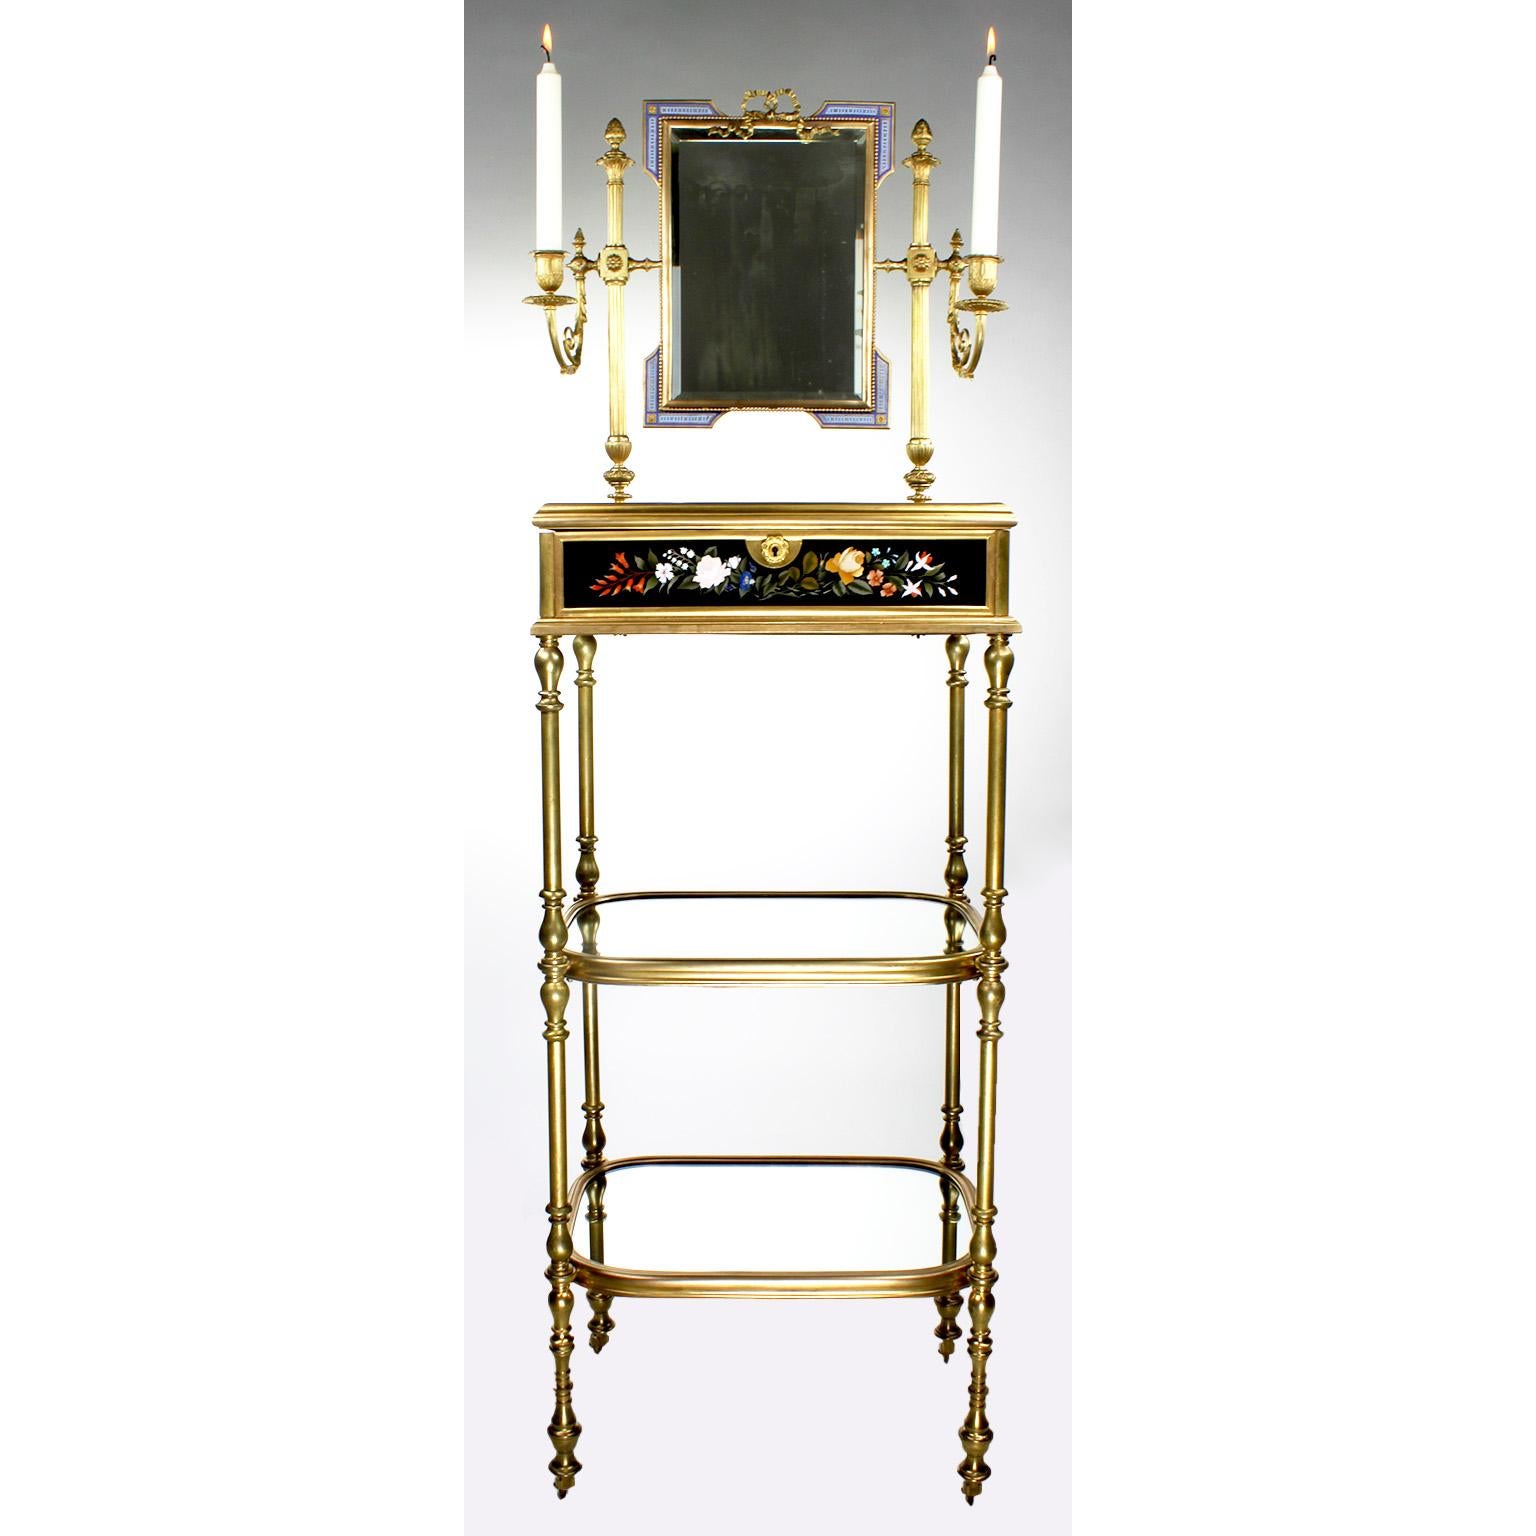 A fine and rare French 19th century gilt-bronze and pietra dura vanity stand, attributed to Jean-Pierre-Alexandre Tahan (1813-1892) - Maison Tahan, Paris. The ornate slender bronze body fitted with a rectangular vanity mirror surmounted with a